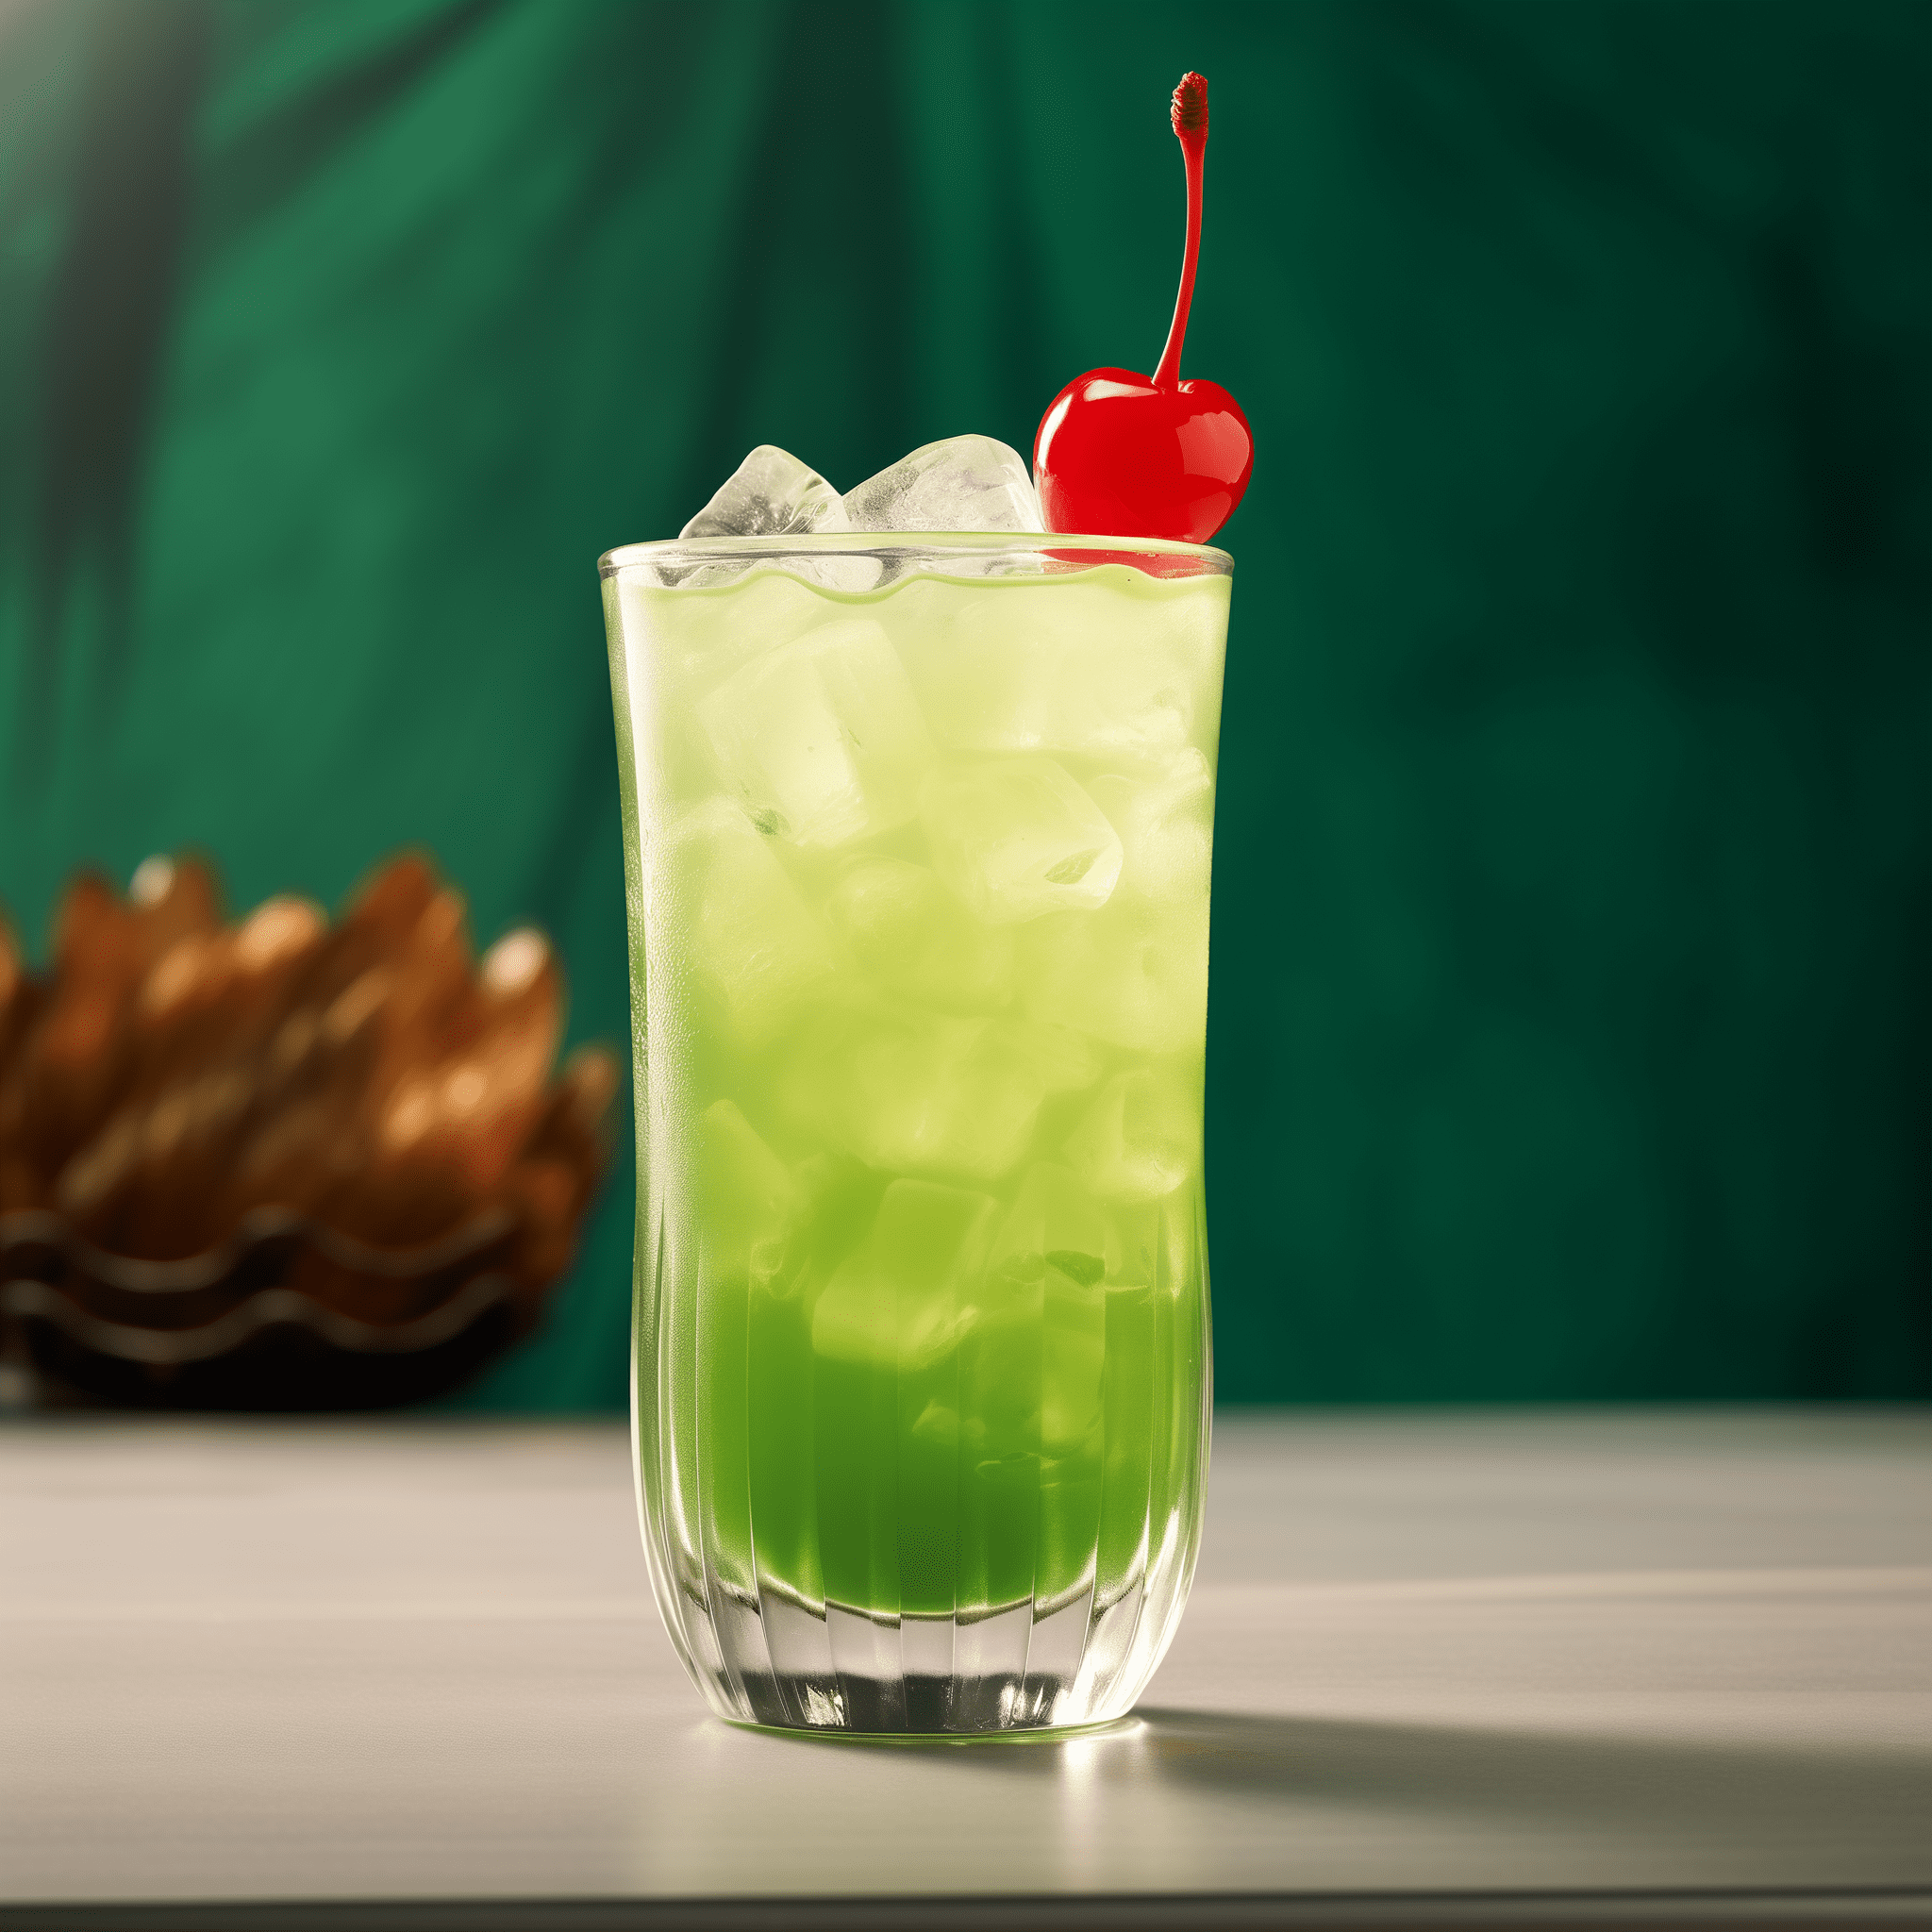 Green Hawaiian Cocktail Recipe - The Green Hawaiian is sweet and creamy, with a tropical fruitiness that's balanced by a subtle tang. It's a light and refreshing drink with a playful punch from the rum.